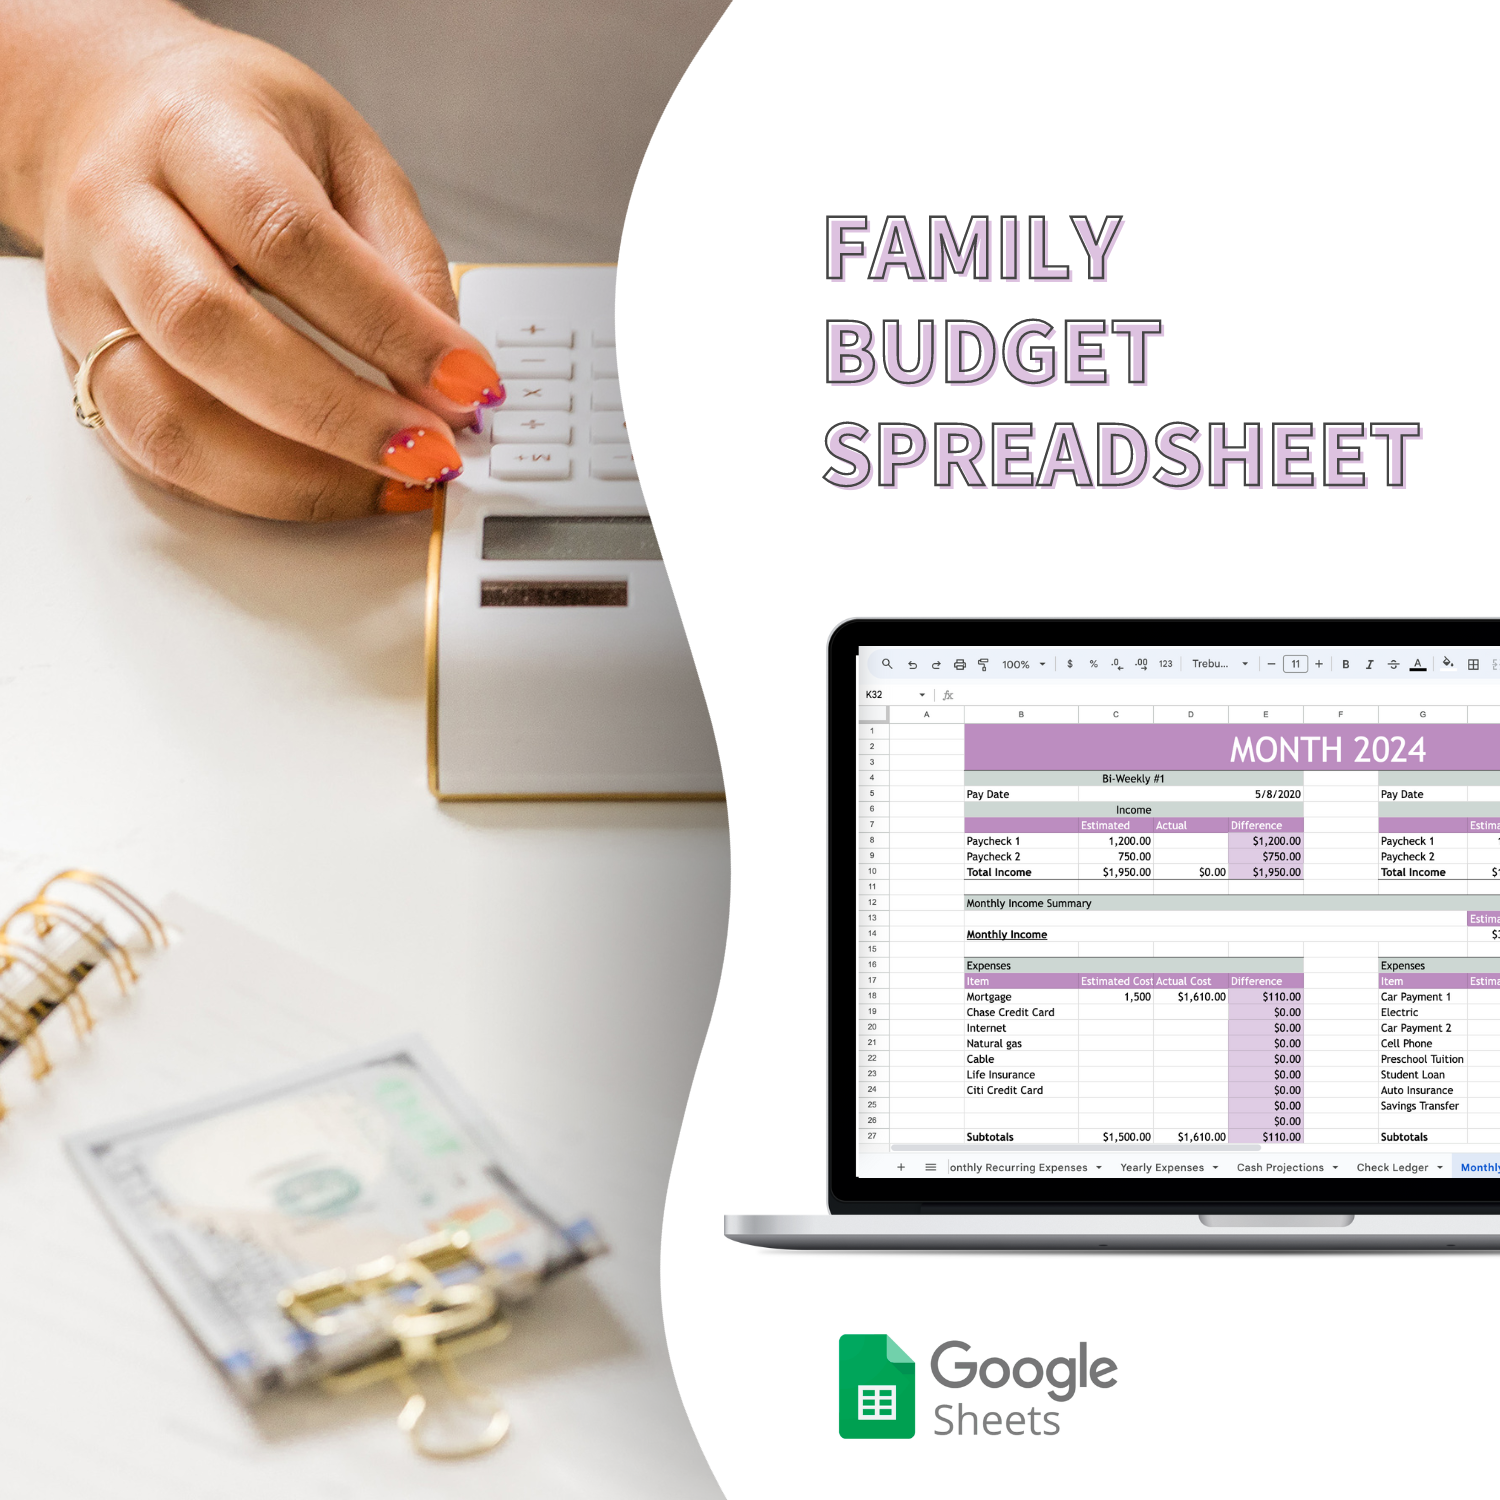 The family budget spreadsheet is your go-to resource for managing your family finances all in one place!